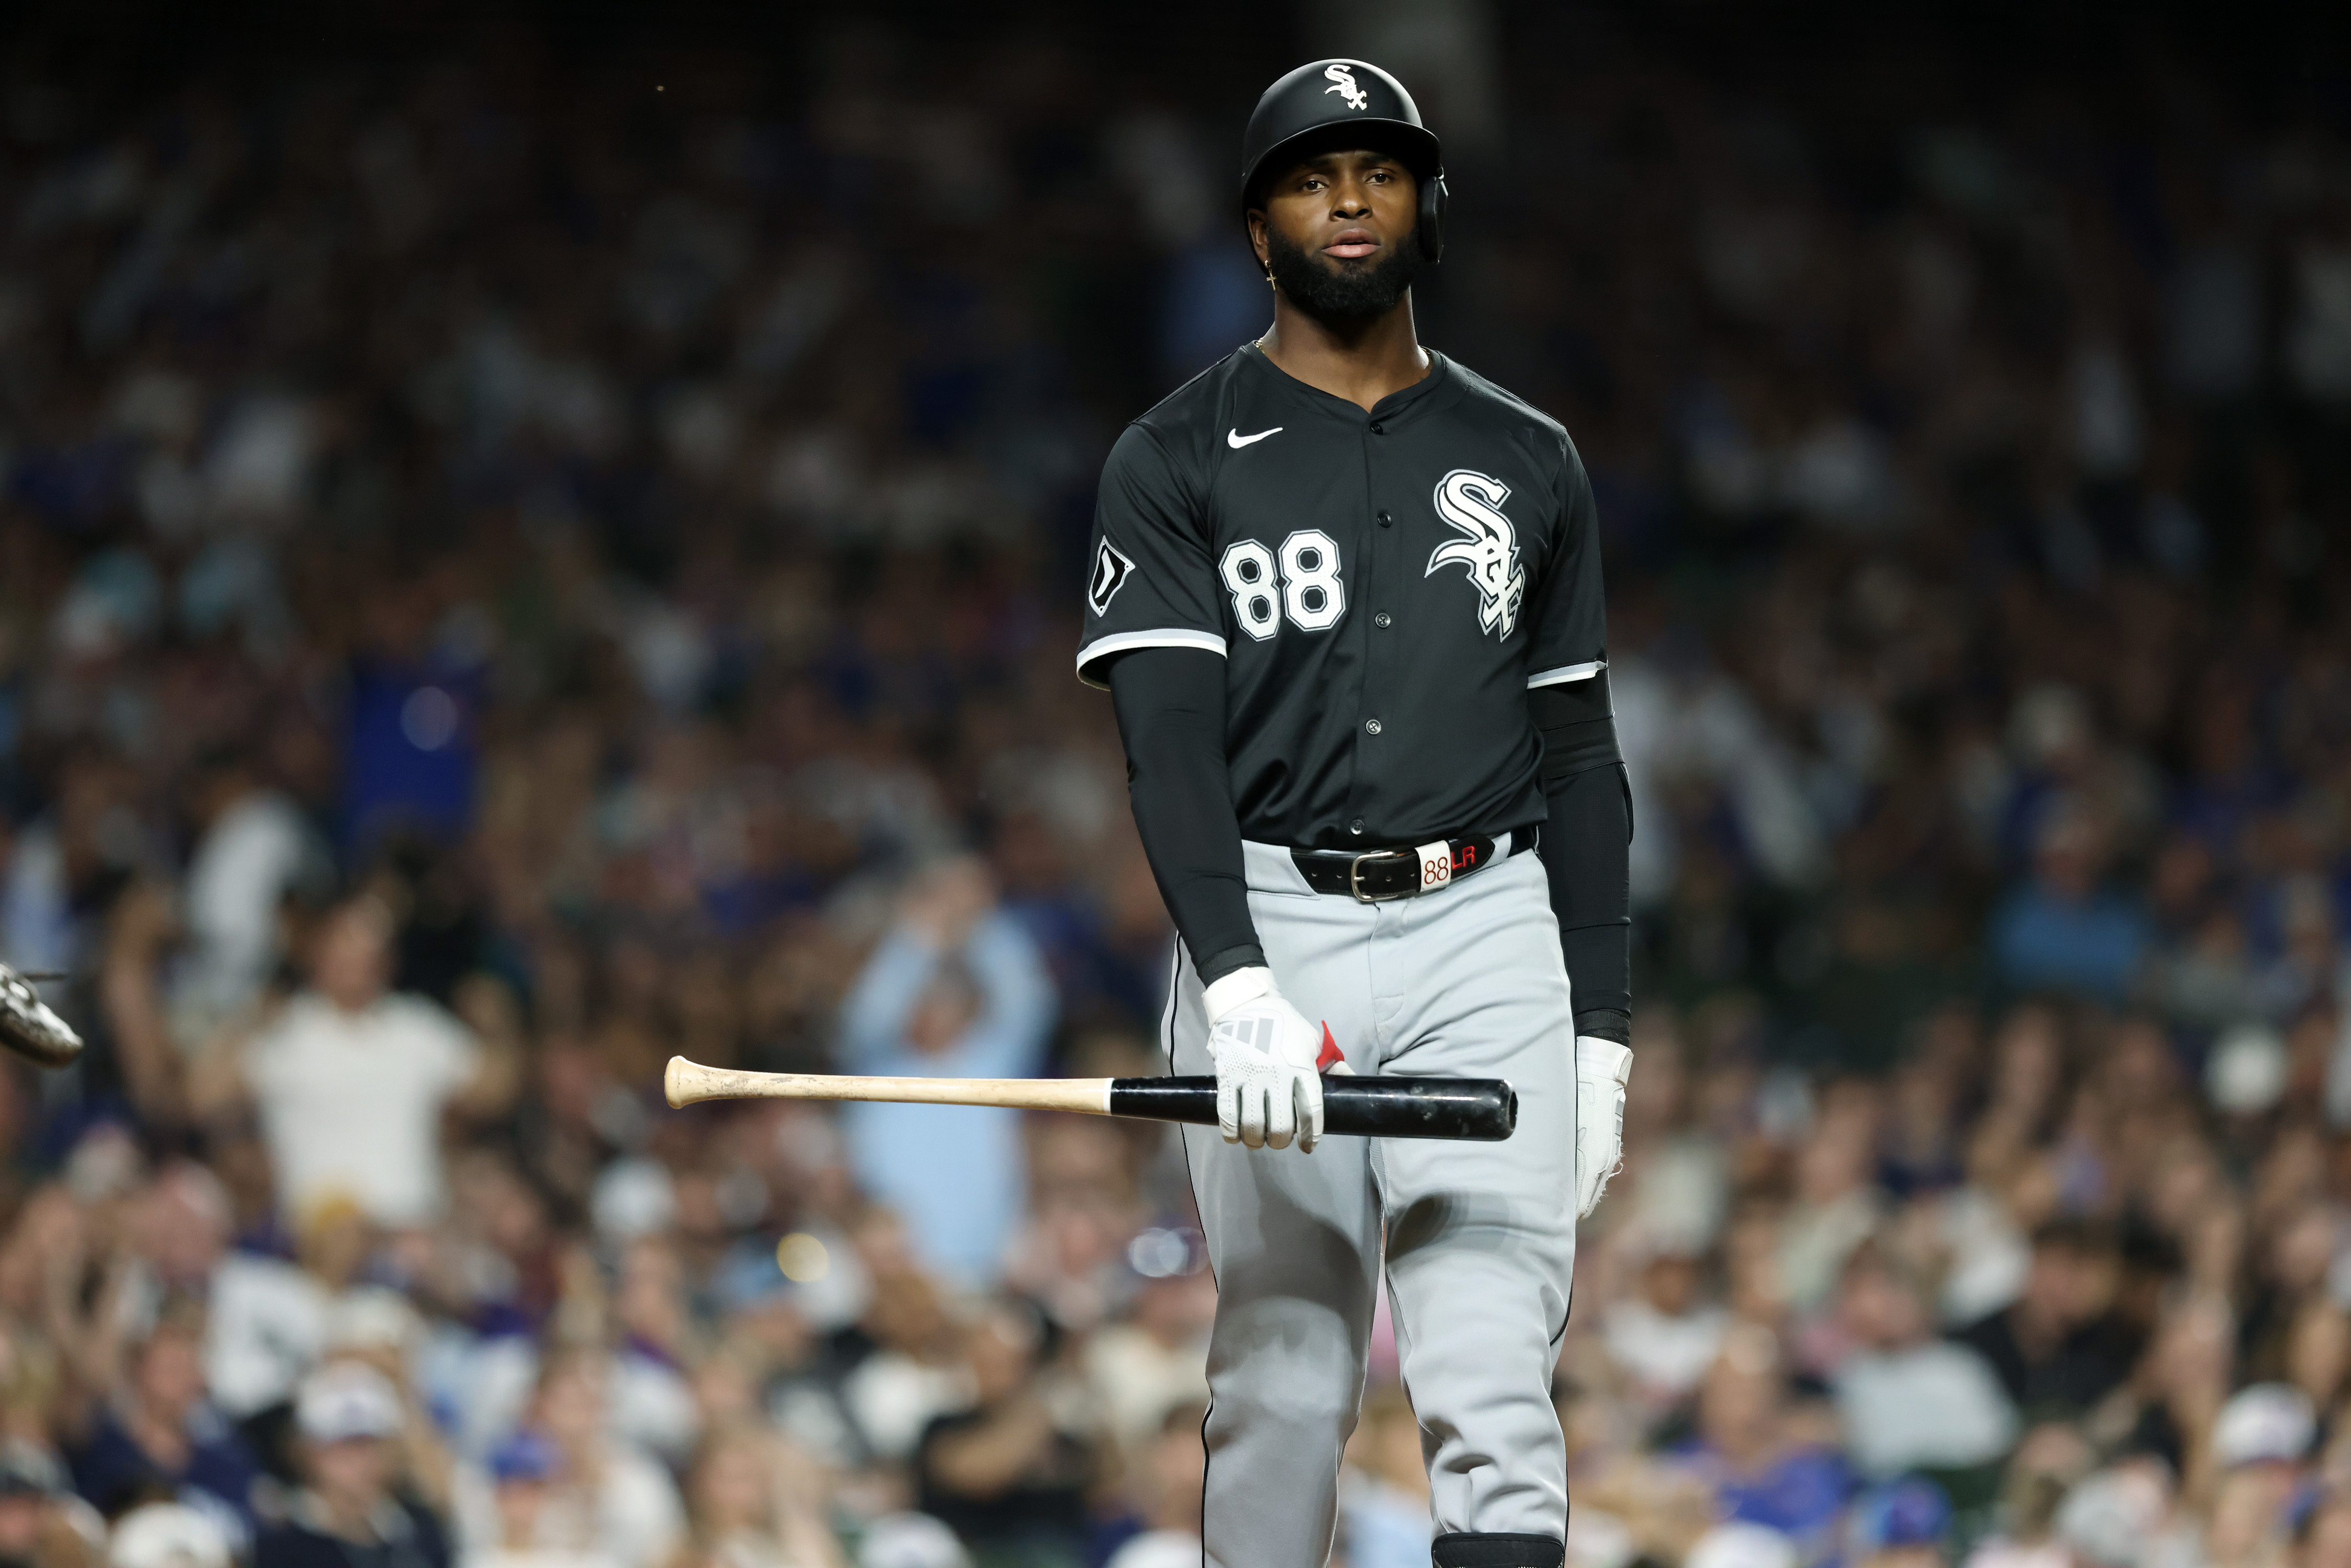 White Sox centerfielder Luis Robert Jr. heads to the dugout after striking out swinging in the ninth inning against the Cubs at Wrigley Field on June 5, 2024, in Chicago. (John J. Kim/Chicago Tribune)